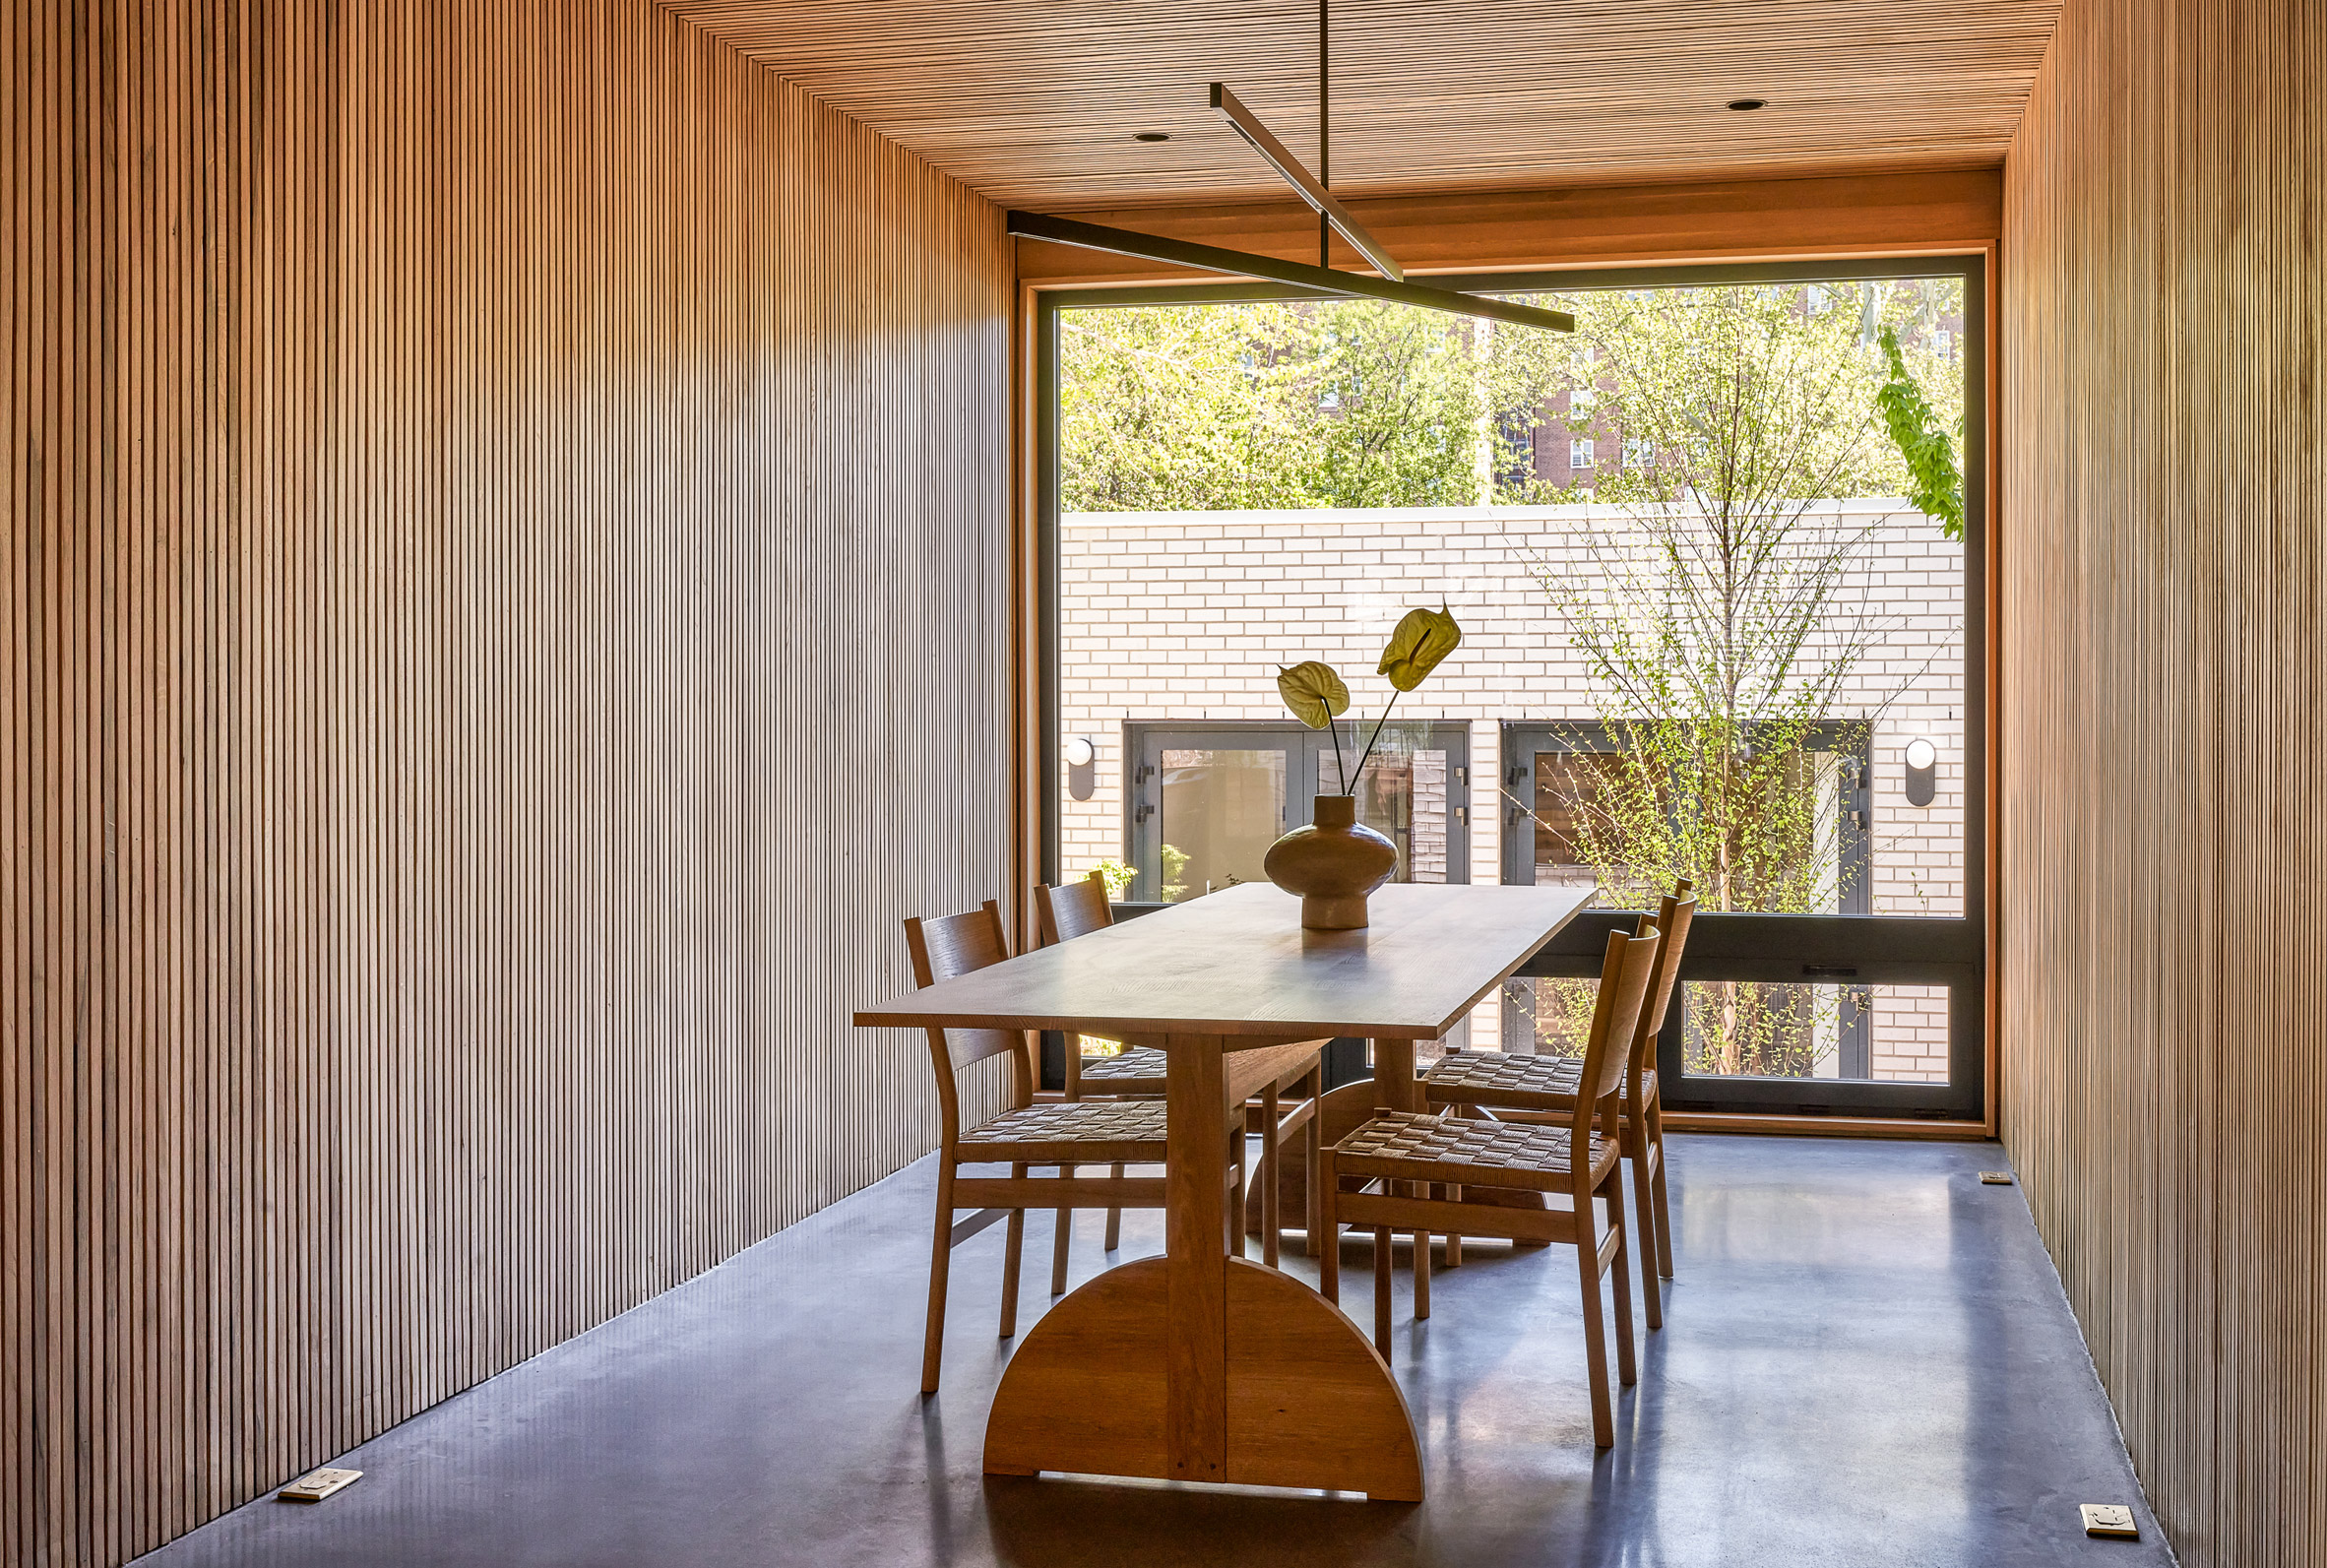 Timber batten-lined walls and ceilings in townhouse by Gradient Architecture